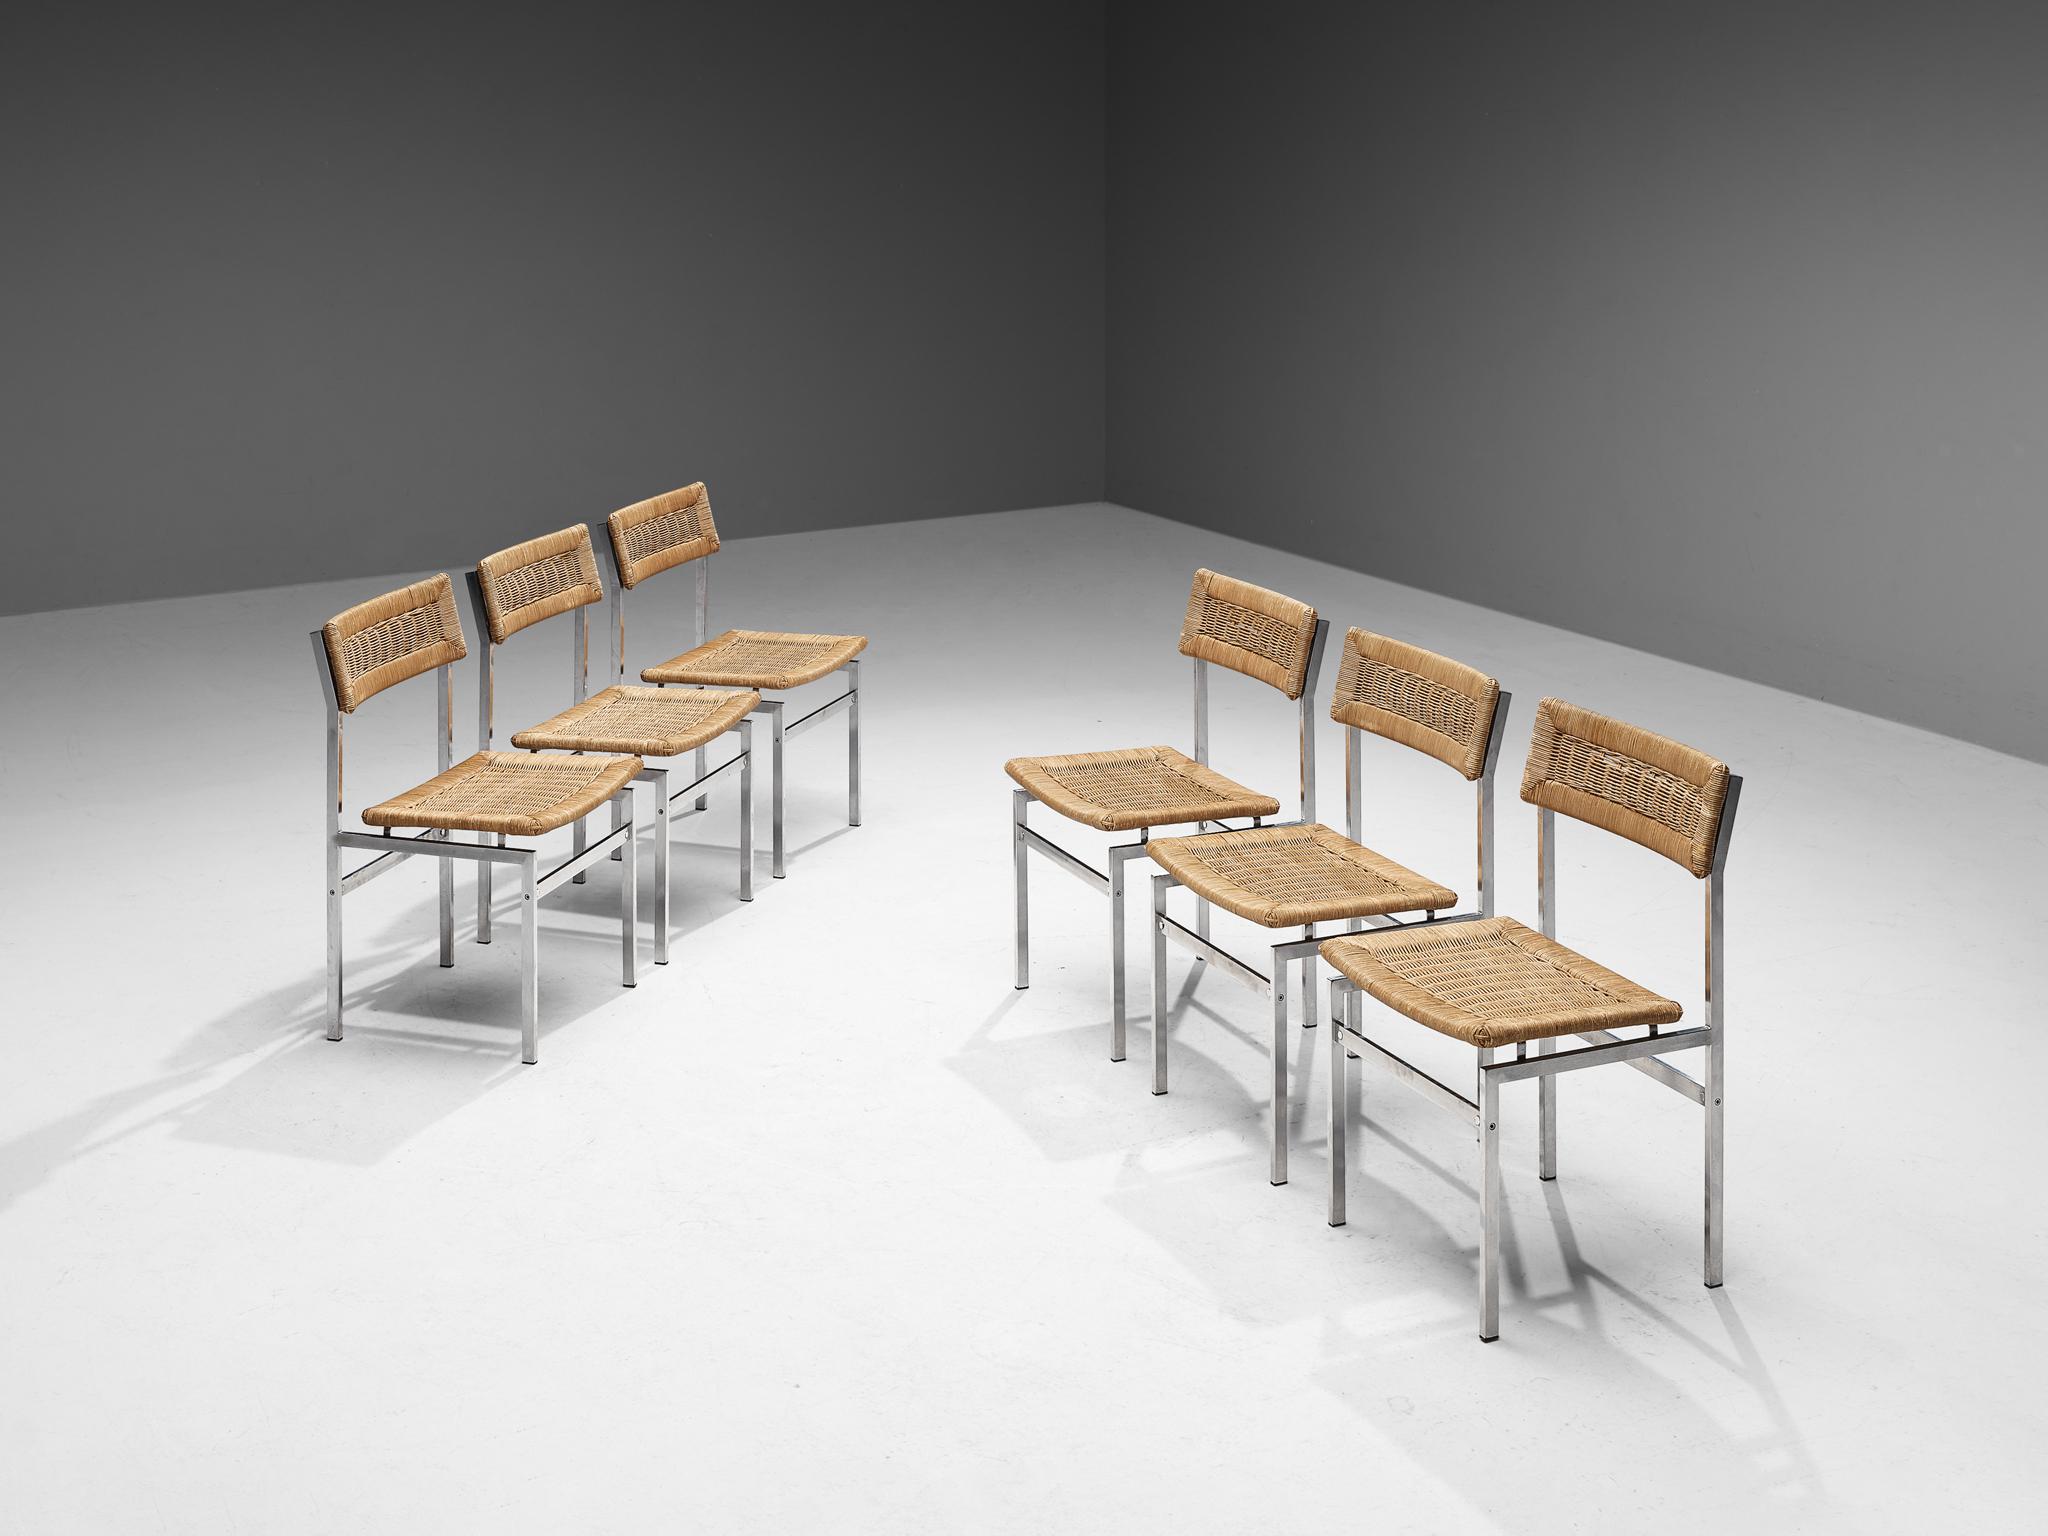 Set of six dining chairs, cane wicker, chromed metal, Belgium, 1960s

This set of chairs is characterized by a splendid construction featuring simple shapes and solid materials. The construction of the frame is based on straight lines and